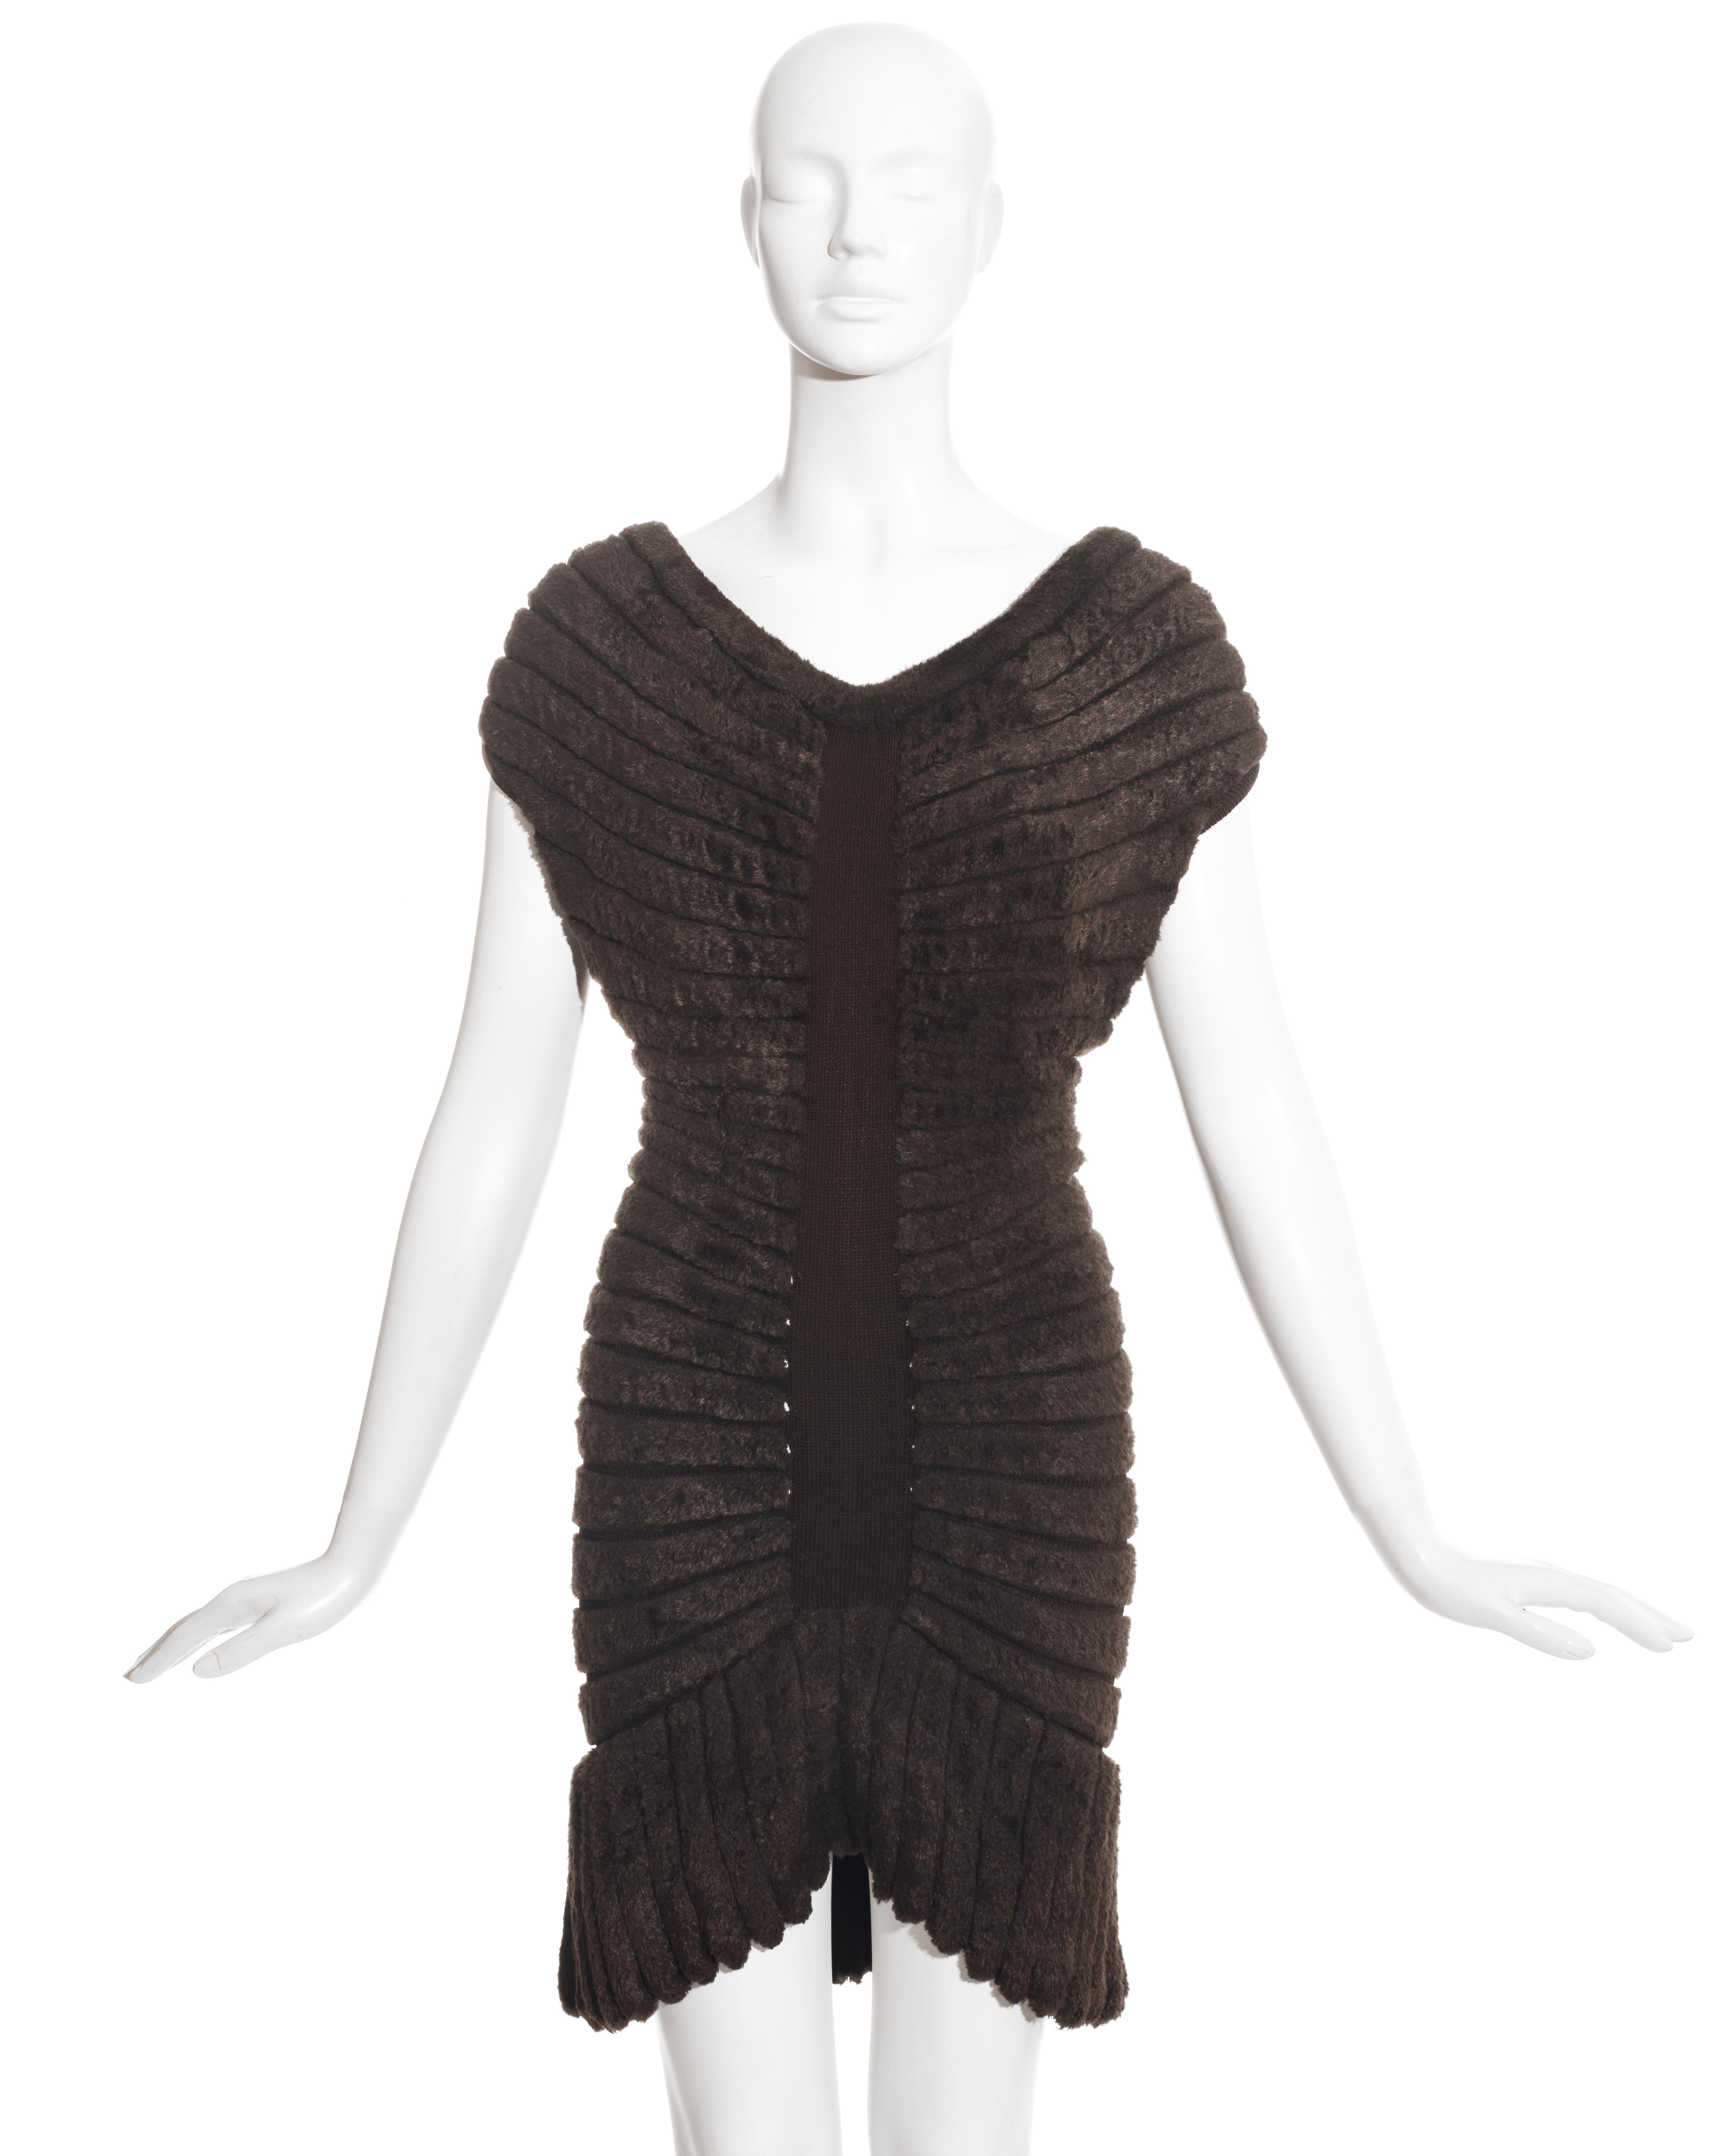 Azzedine Alaïa brown chenille-knitted 'Houpette' mini dress. Sculpted figure-hugging design with concentric chenille bands.

Spring-Summer 1994